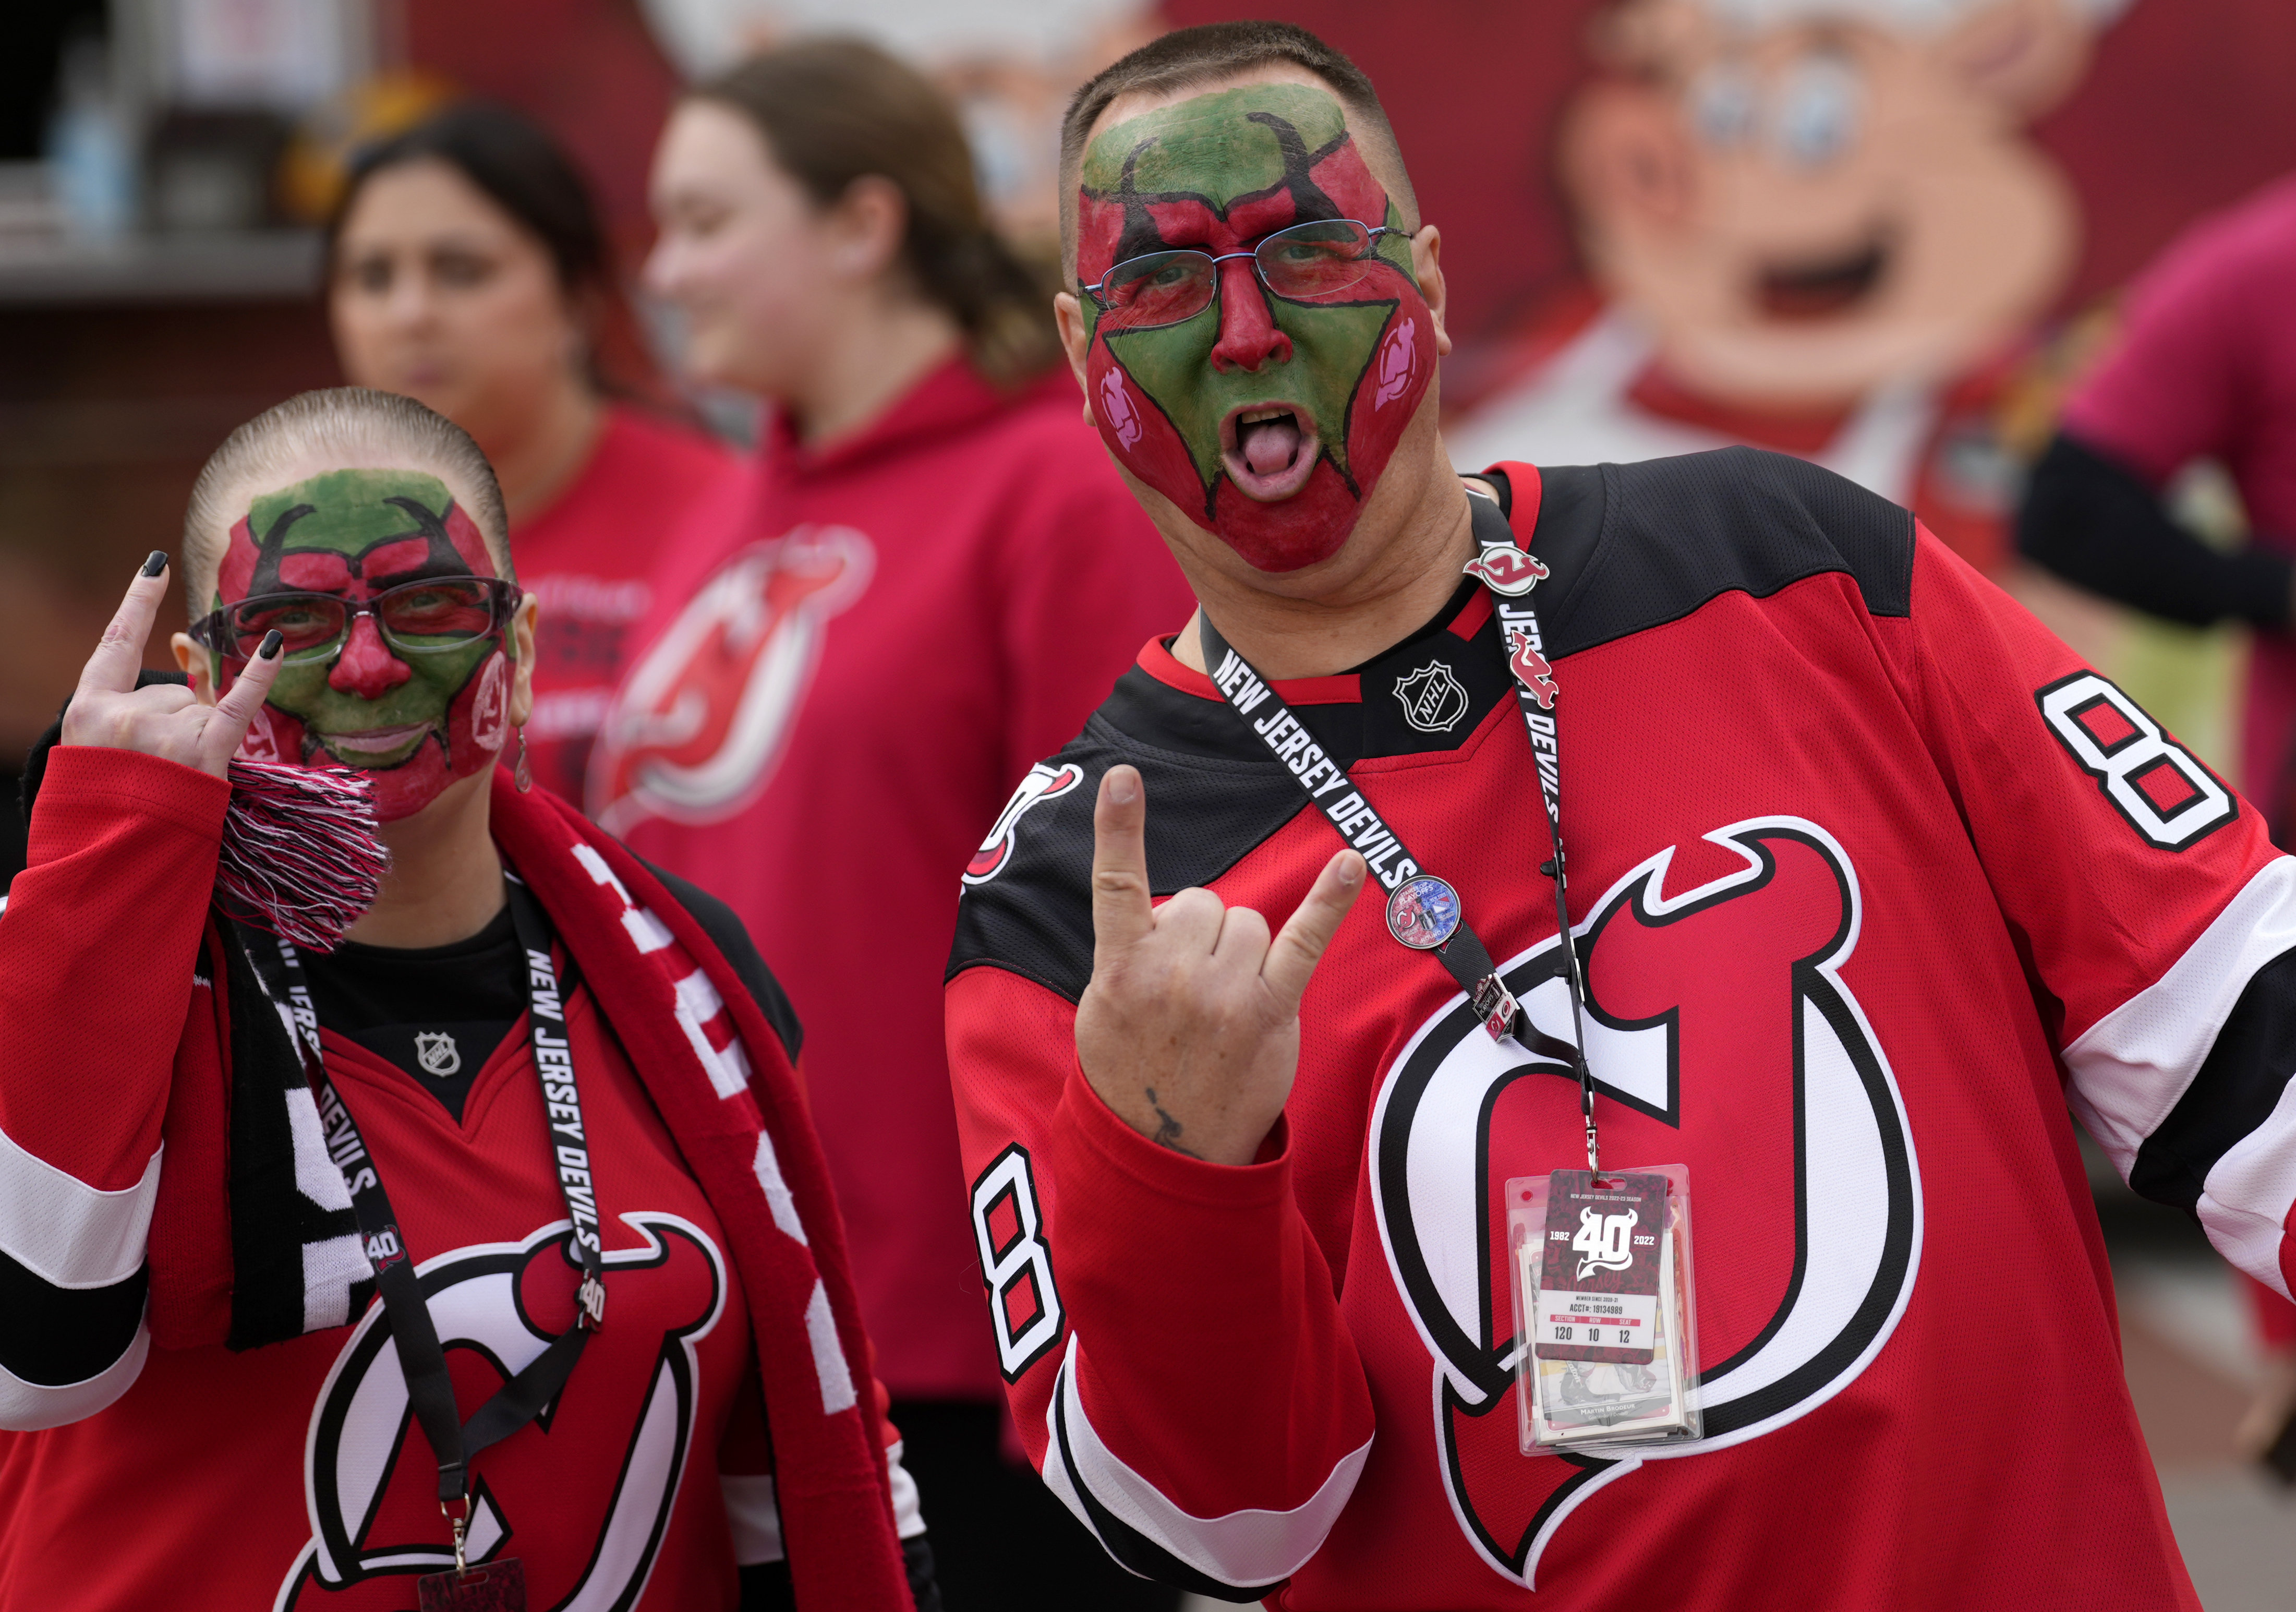 What Do The New Jersey Devils Need to do to be More Competitive in 2020-21?  - All About The Jersey